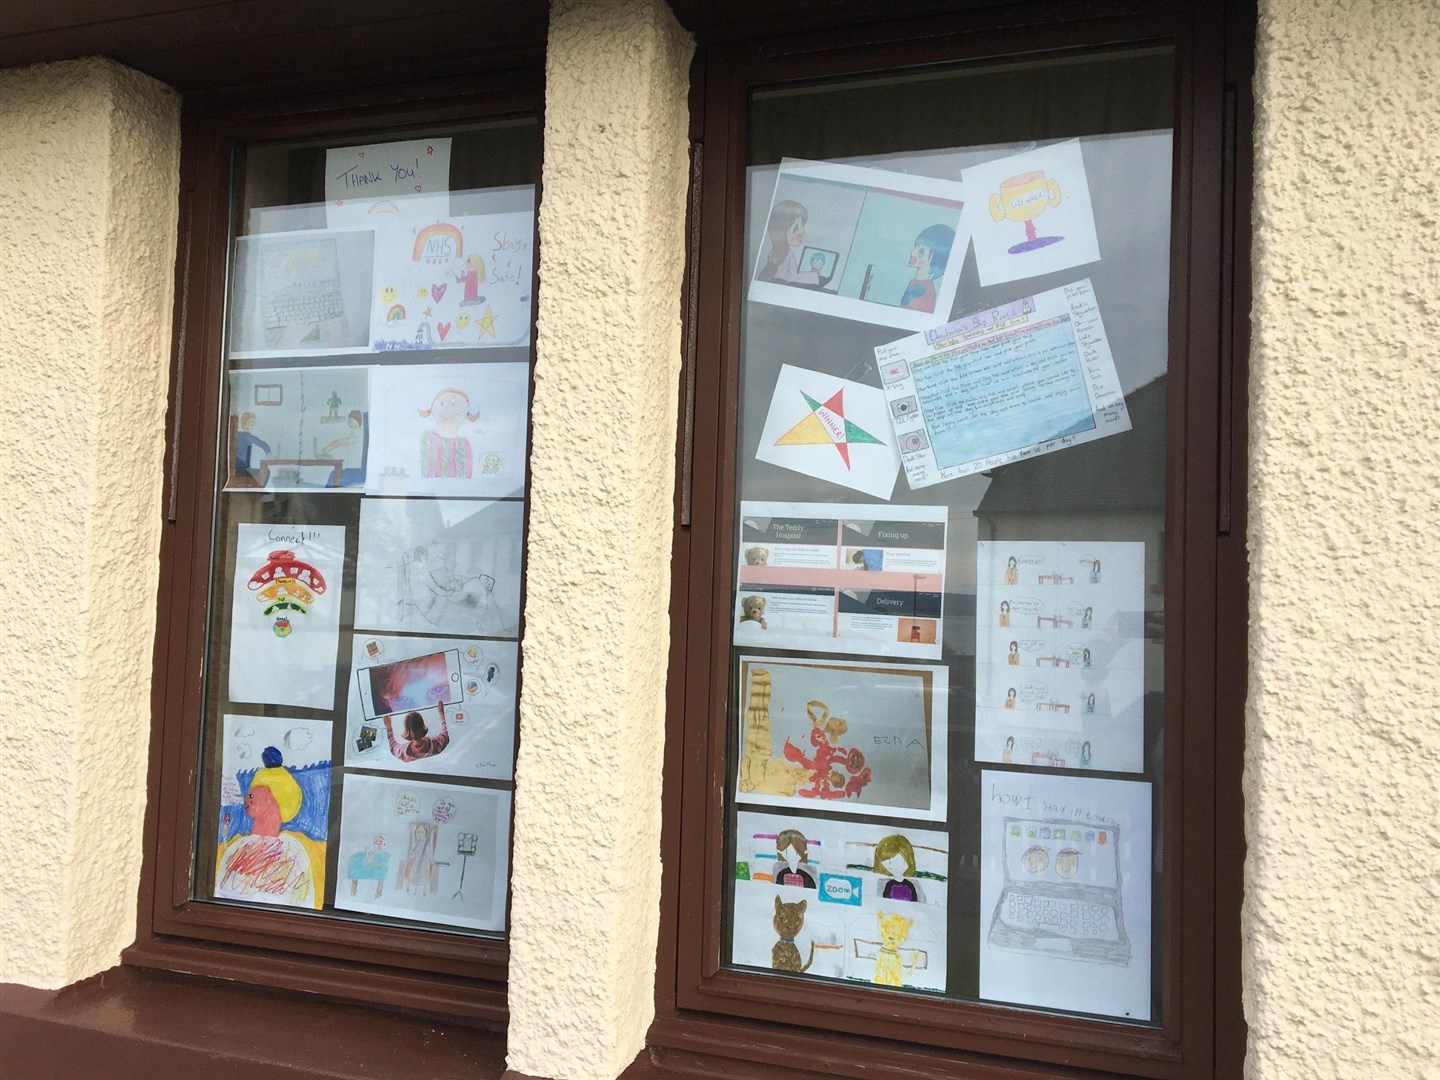 Entries posted in the Calico office window.